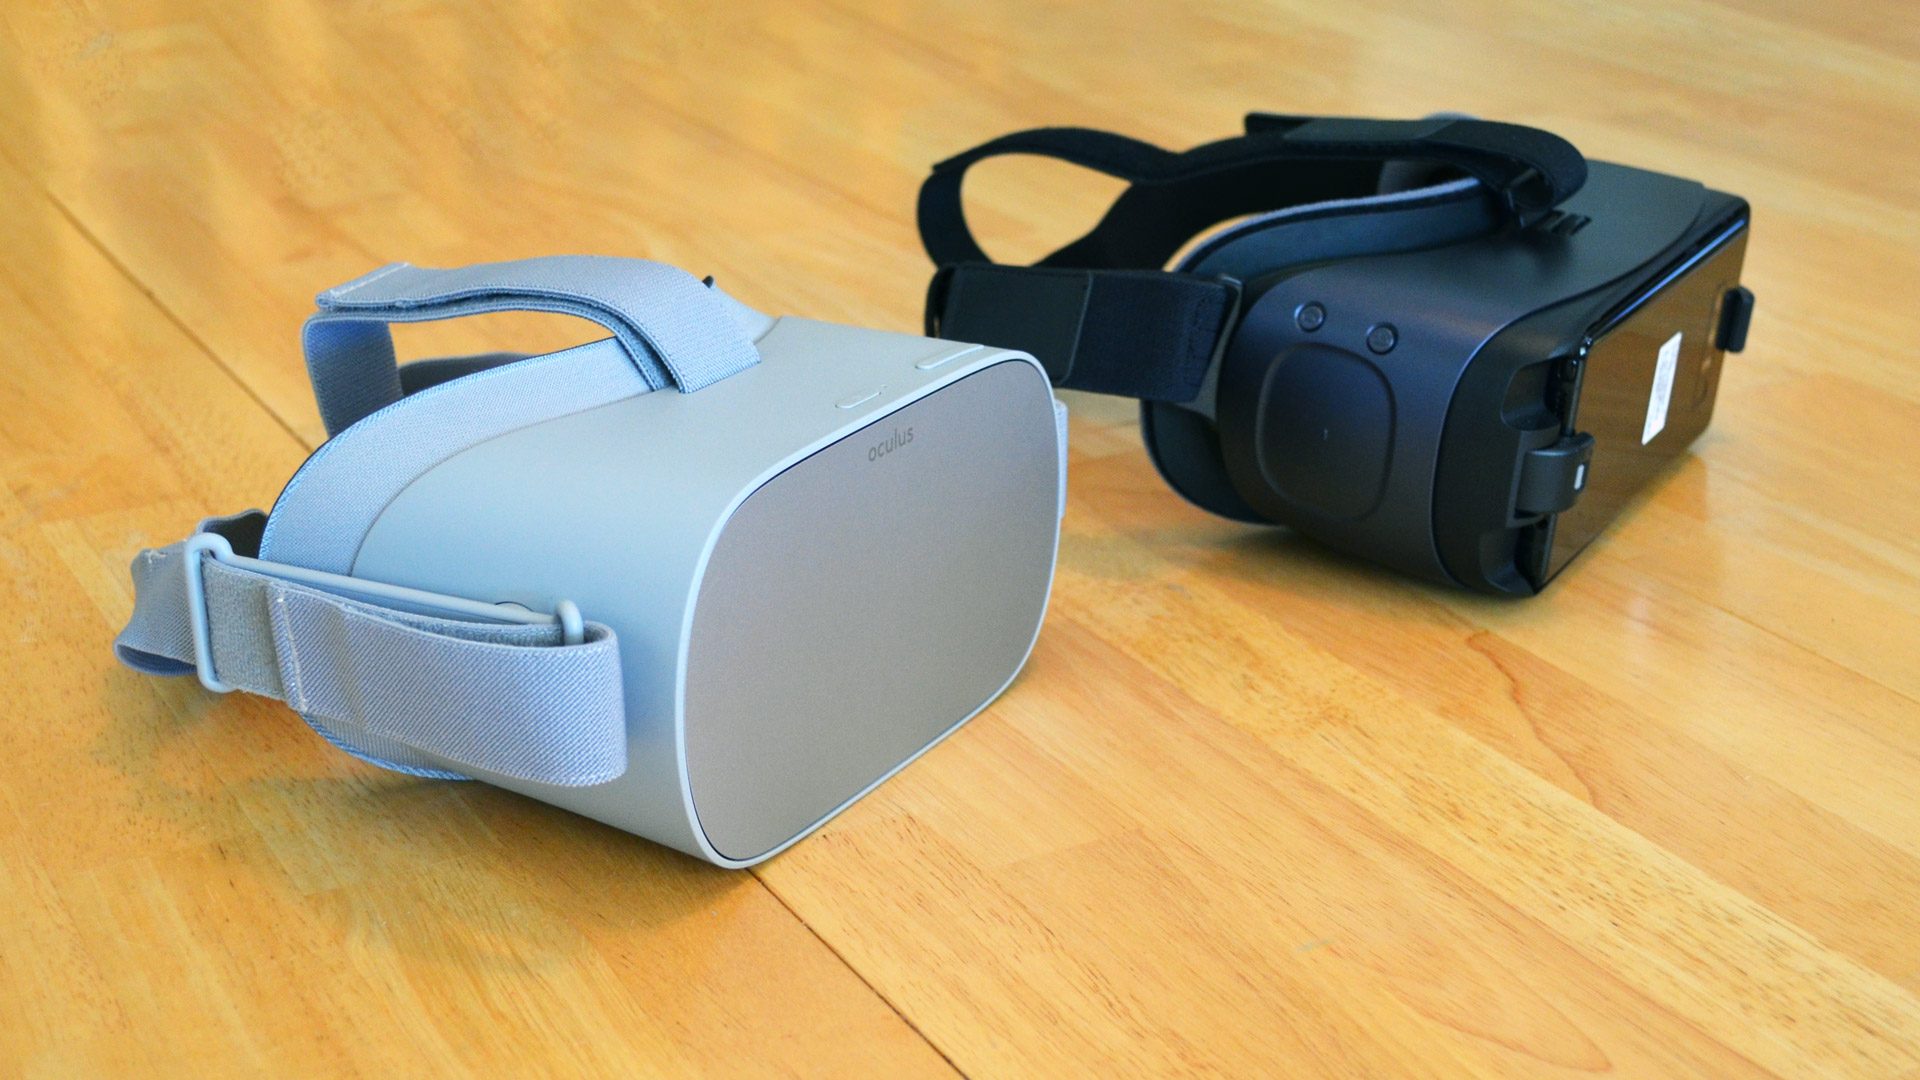 Oculus Go Review: Standalone VR Priced for the Masses